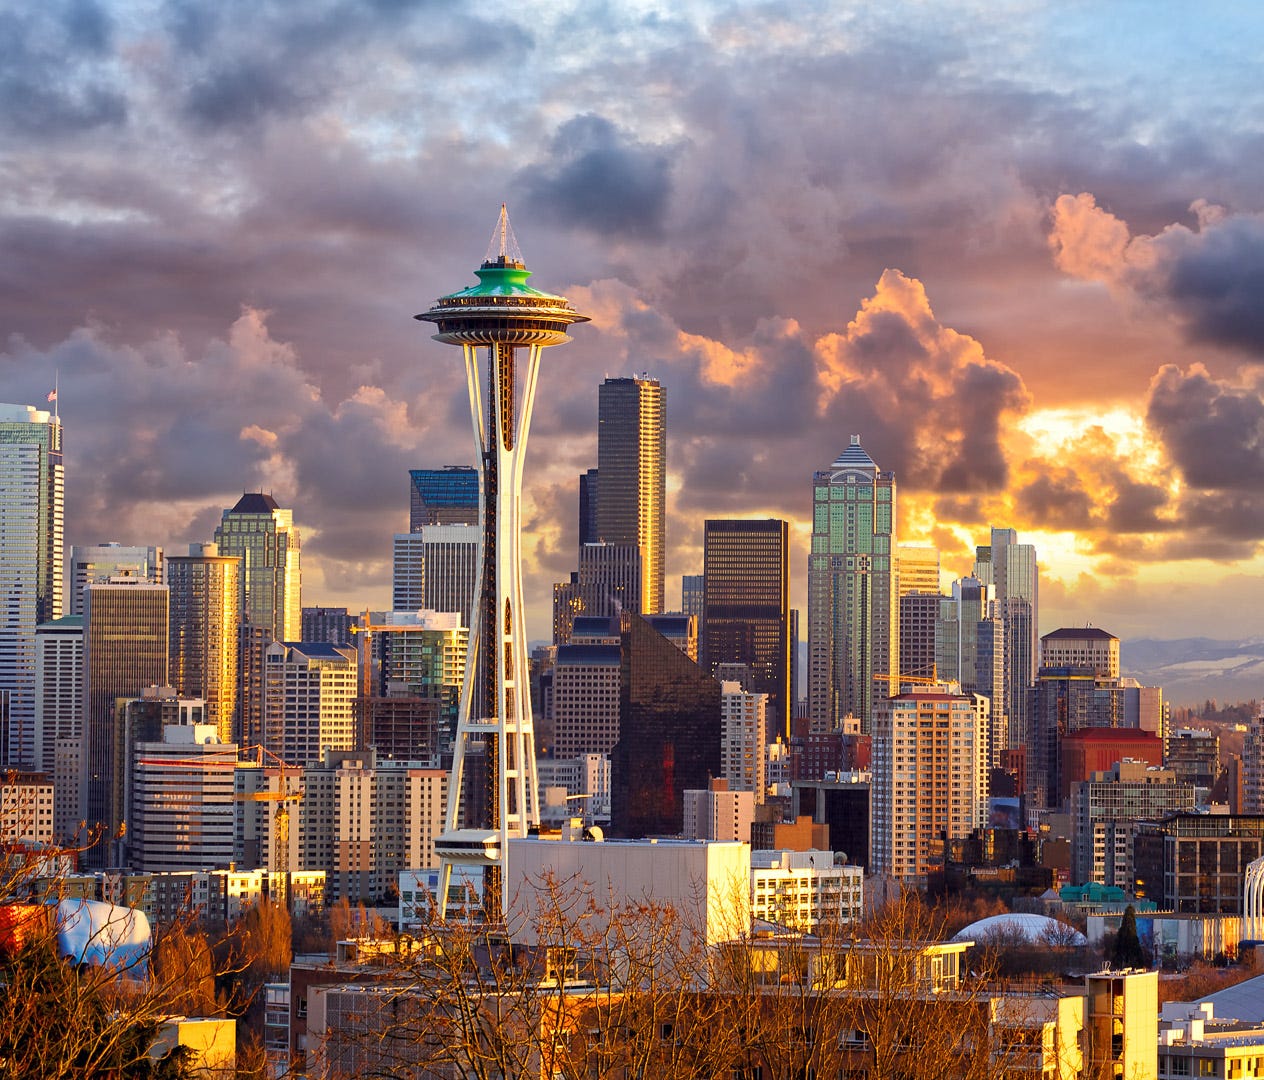 12. Seattle: Seattle hotels are among the cheapest, and airfare falls in the middle compared to the other vacation cities. But food and drink can be expensive, with the average three-course dinner for two costing $60, and domestic beers going for $5.